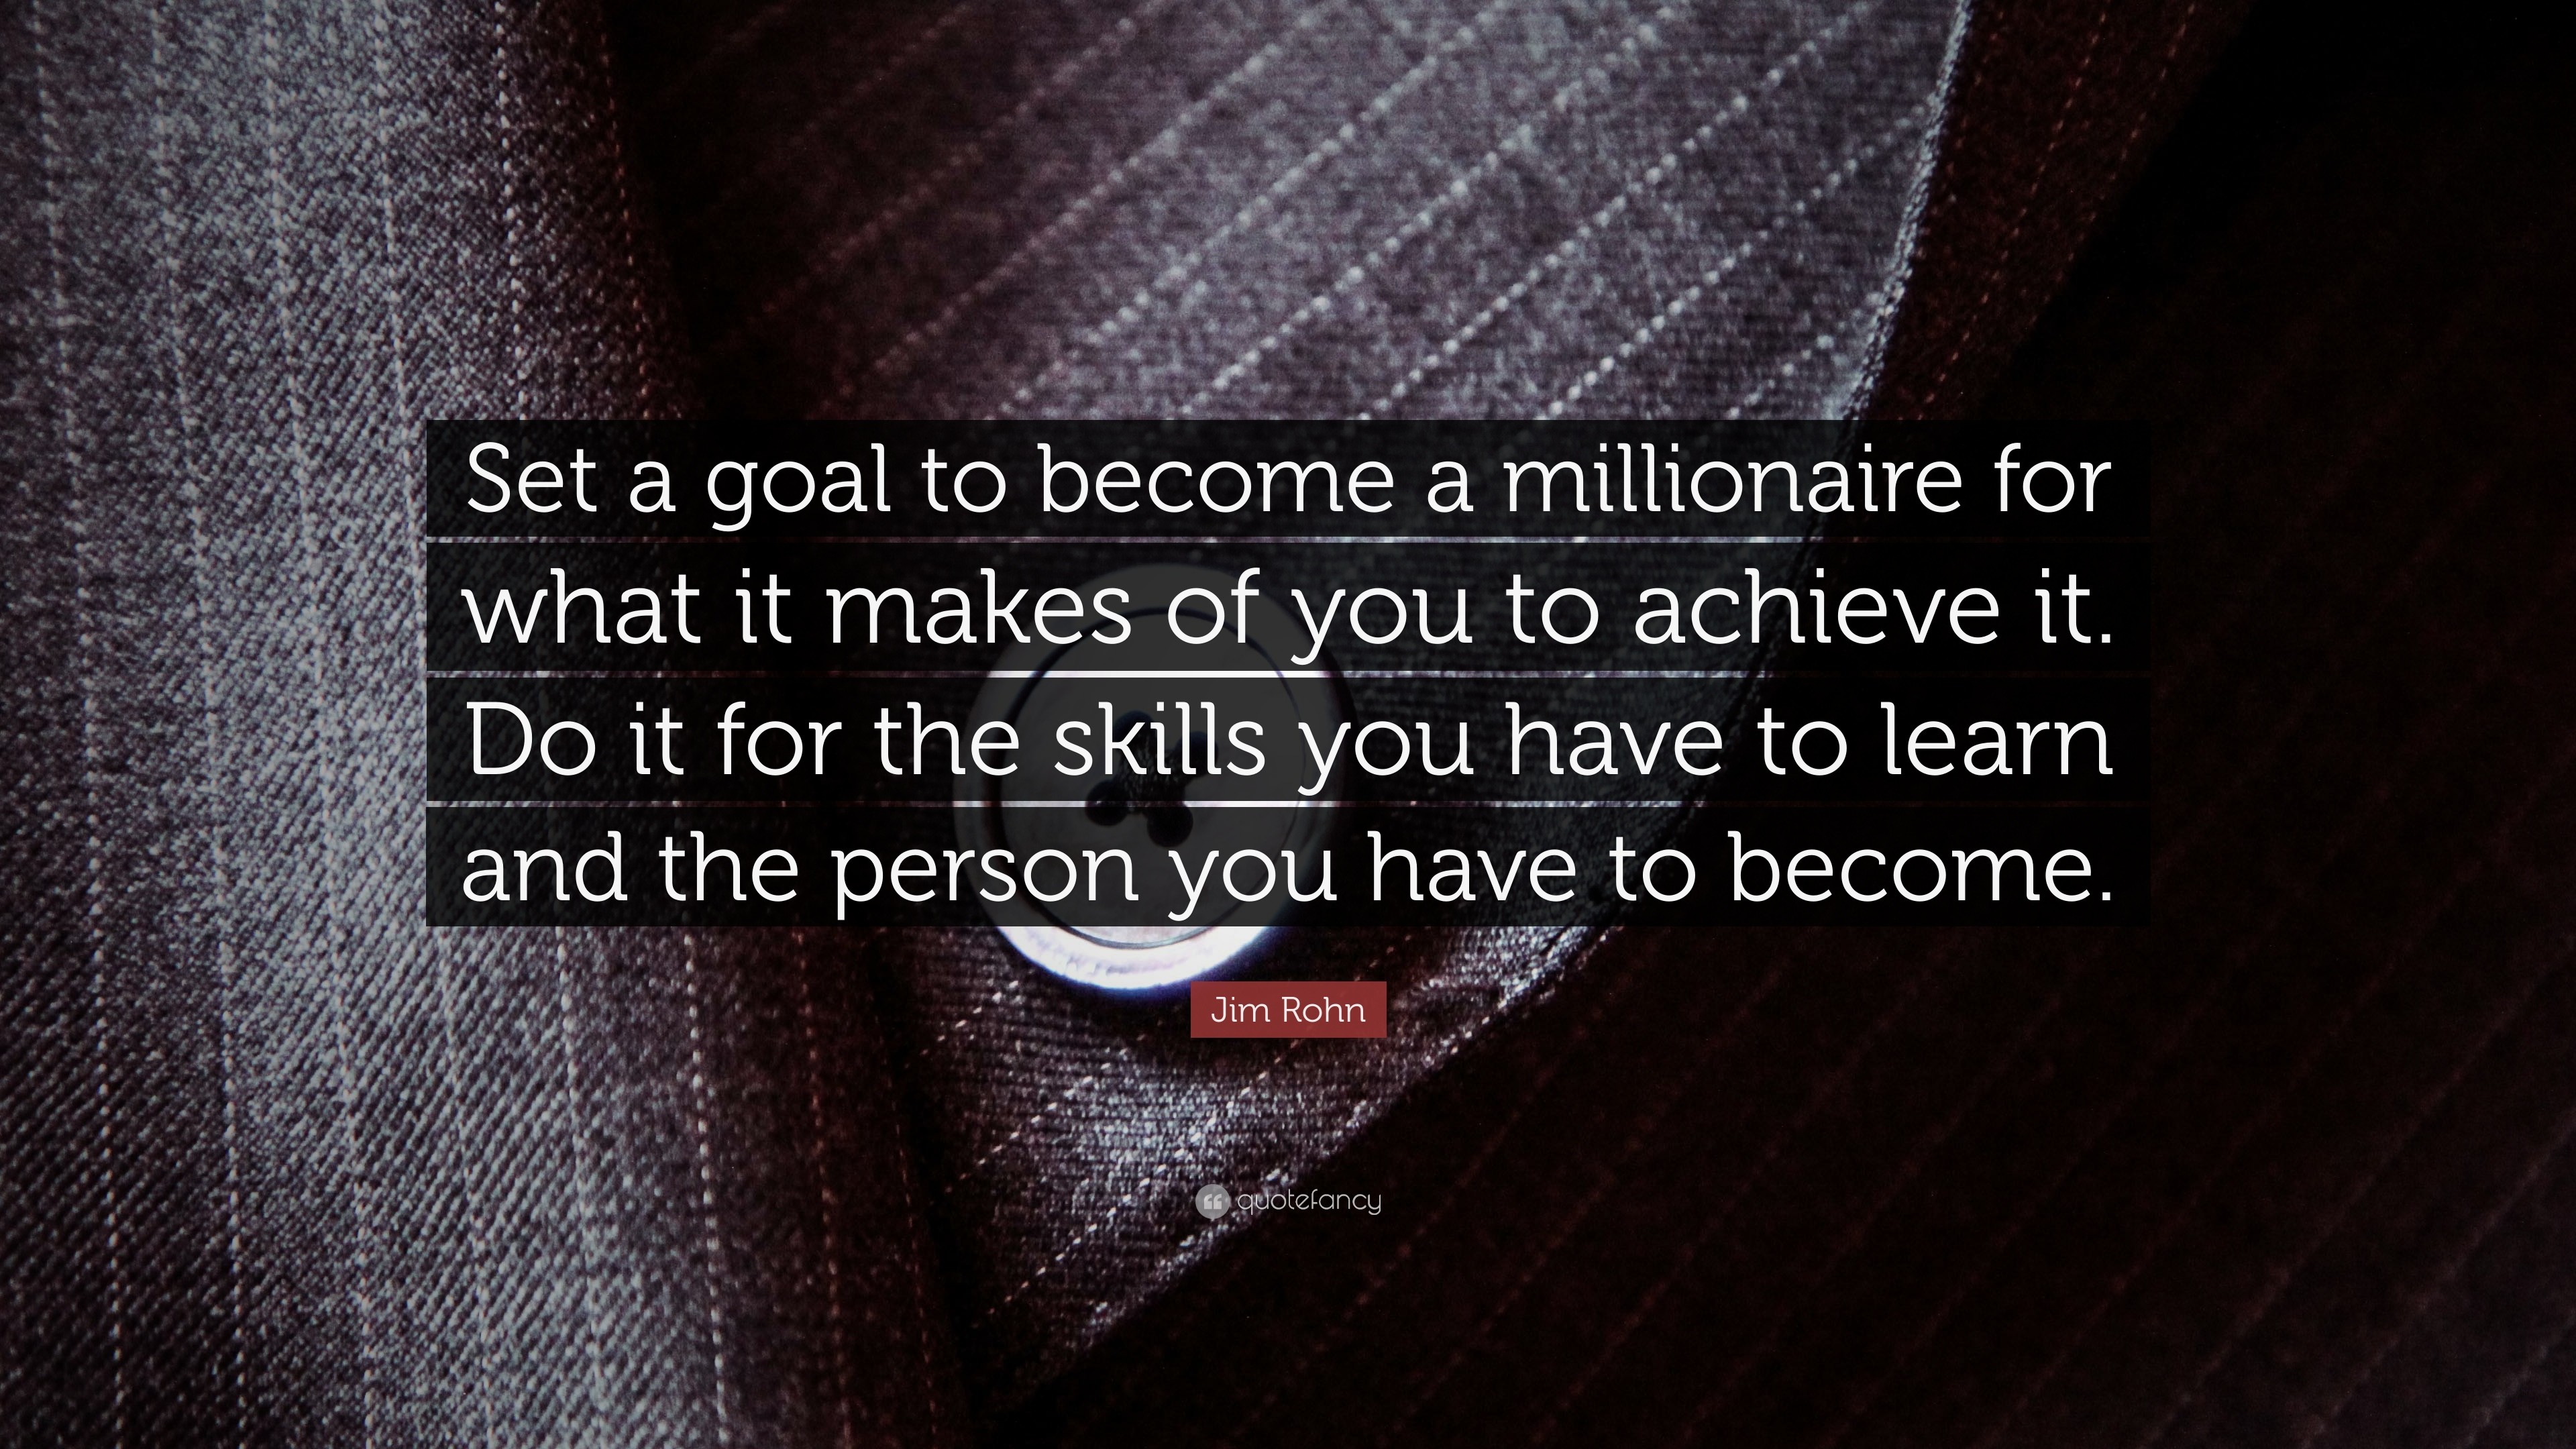 3840x2160 Jim Rohn Quote: “Set a goal to become a millionaire for what it makes